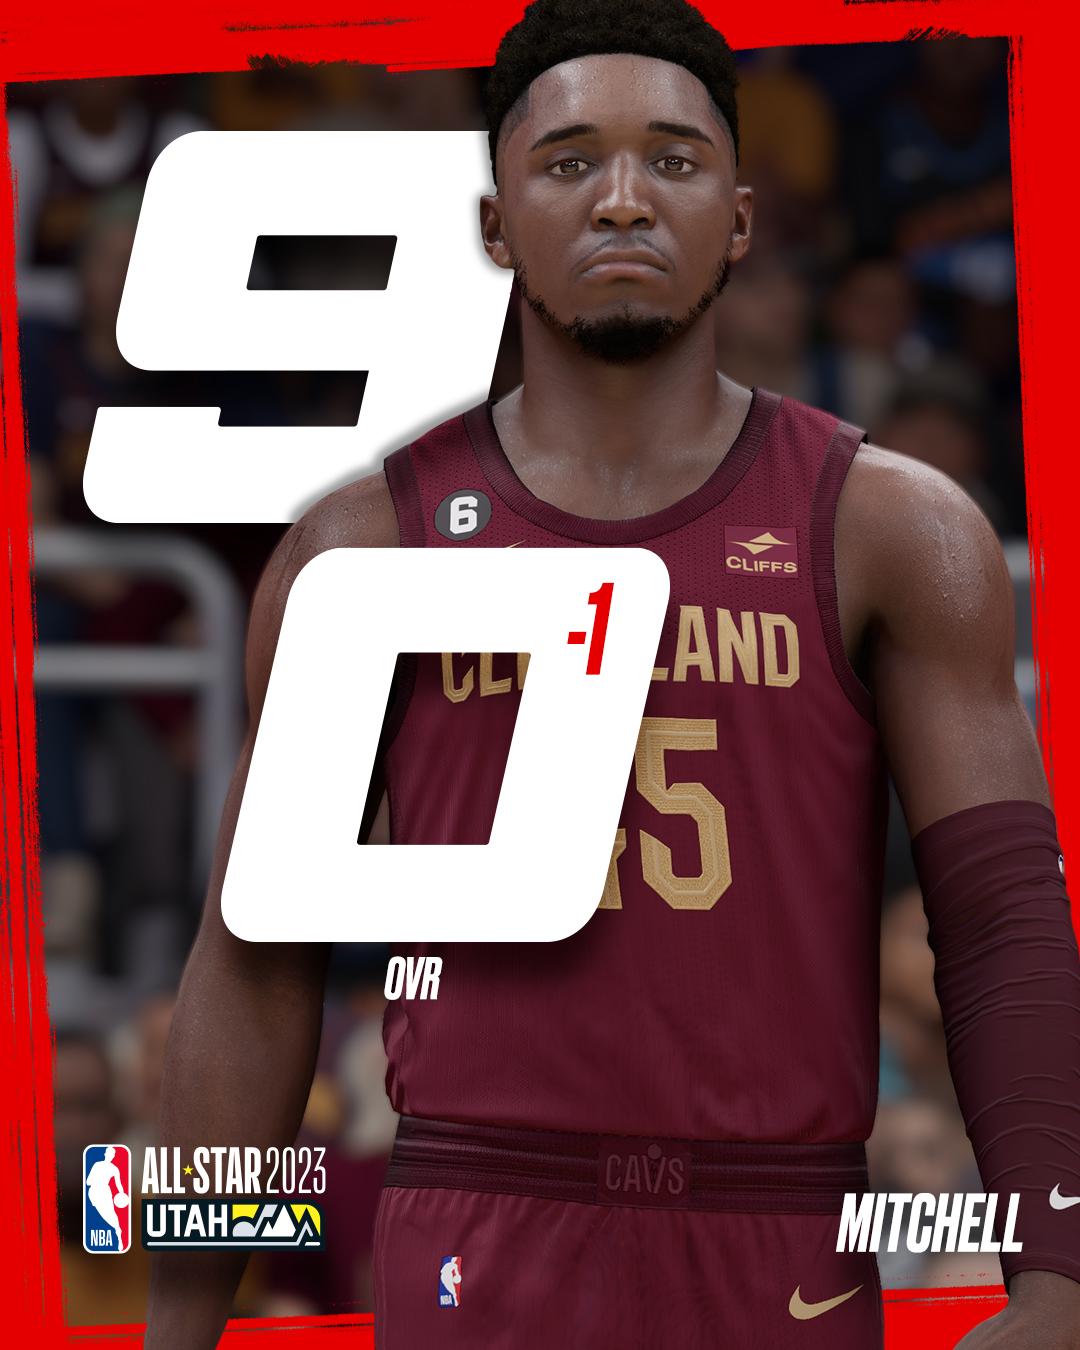 NBA 2K22 Roster Update Available - Full Details Here (2-17)